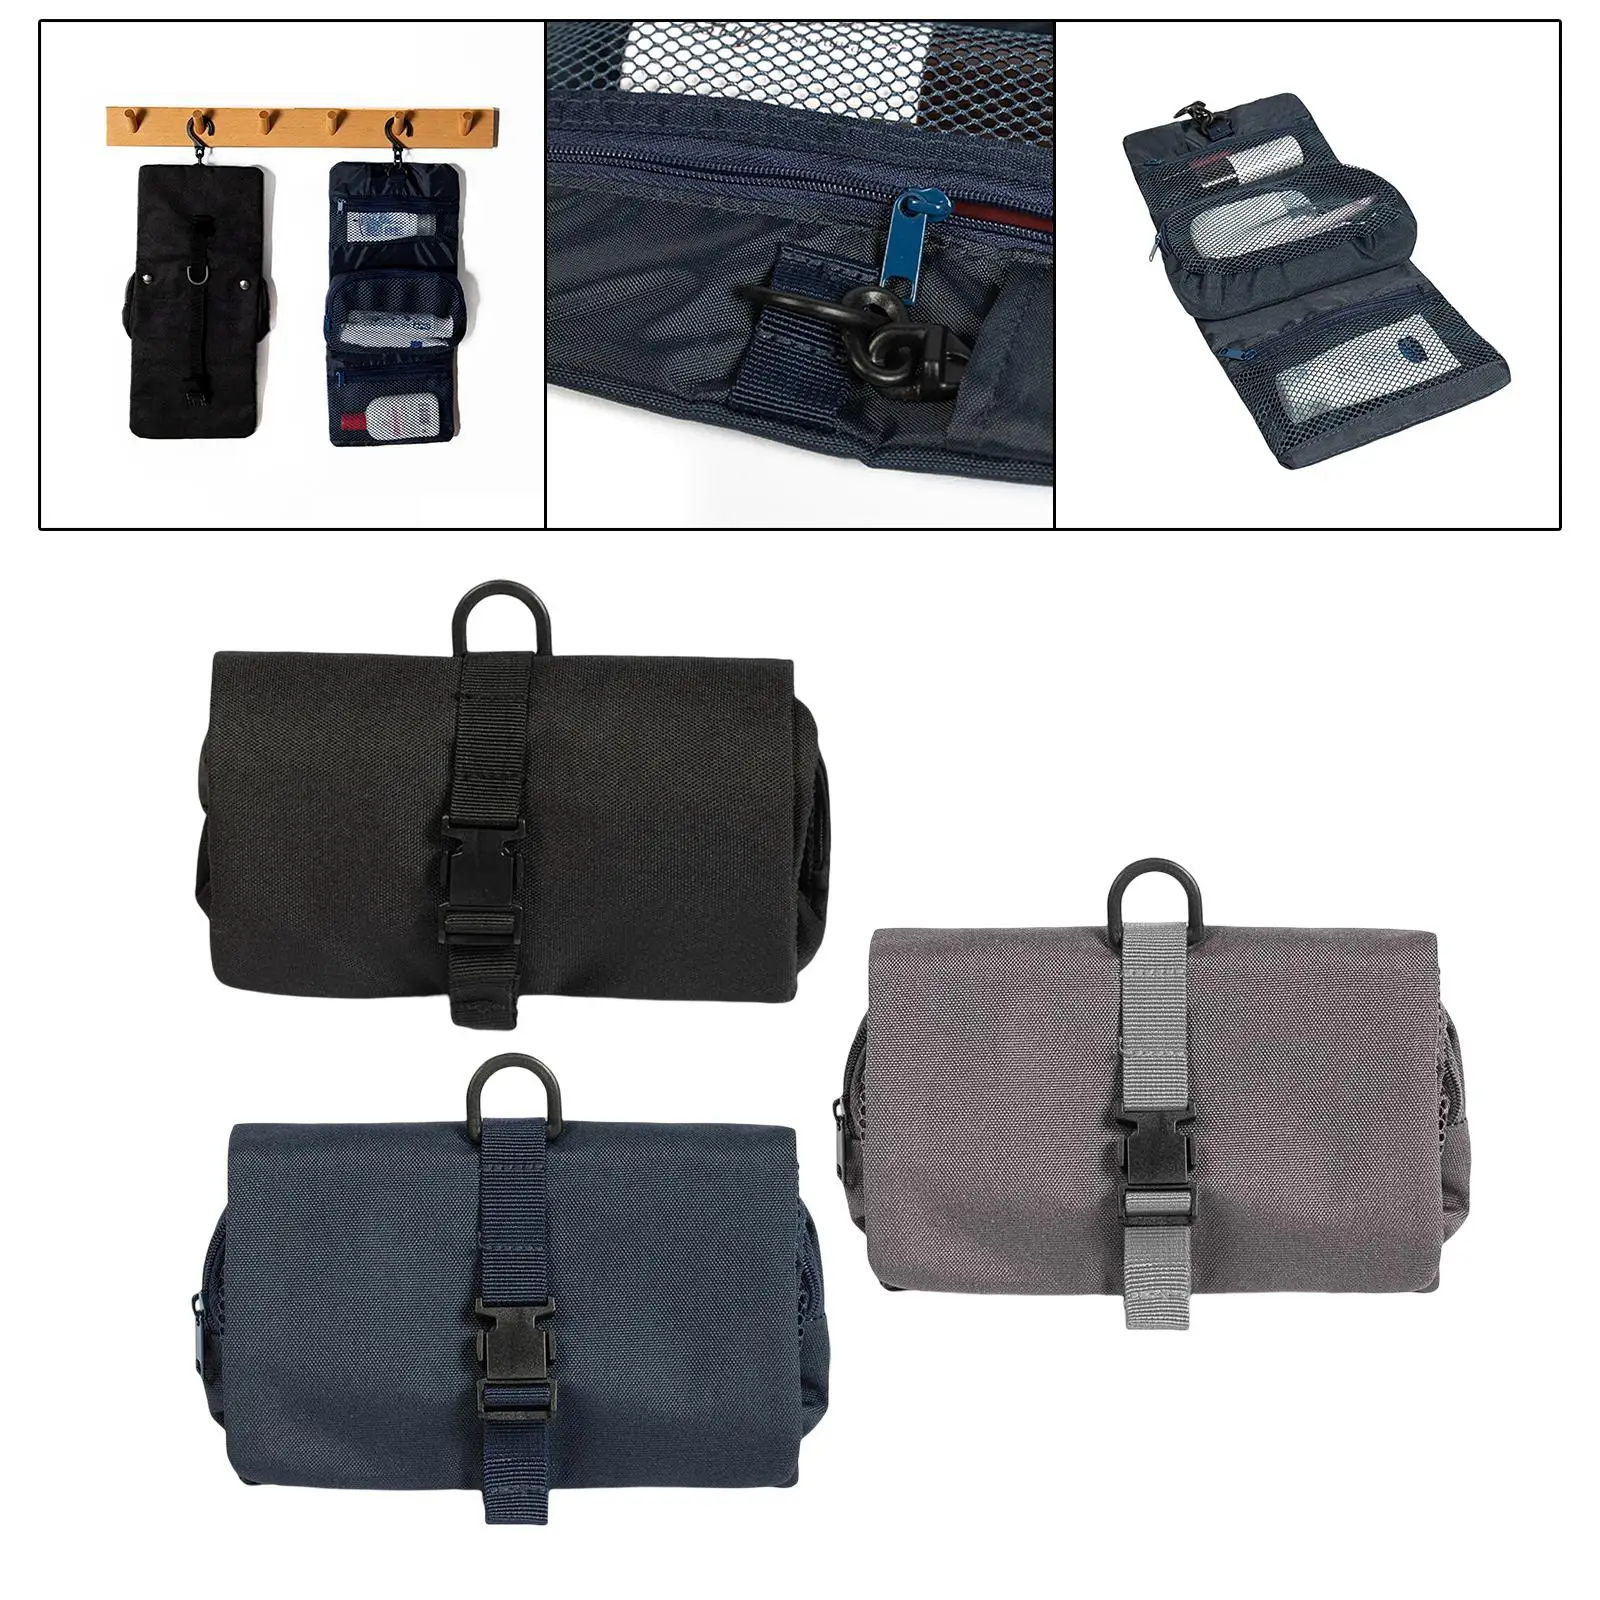 Travel Toiletry Bags Multifunctional Hanging Toiletries Storage Case Travel Pouch